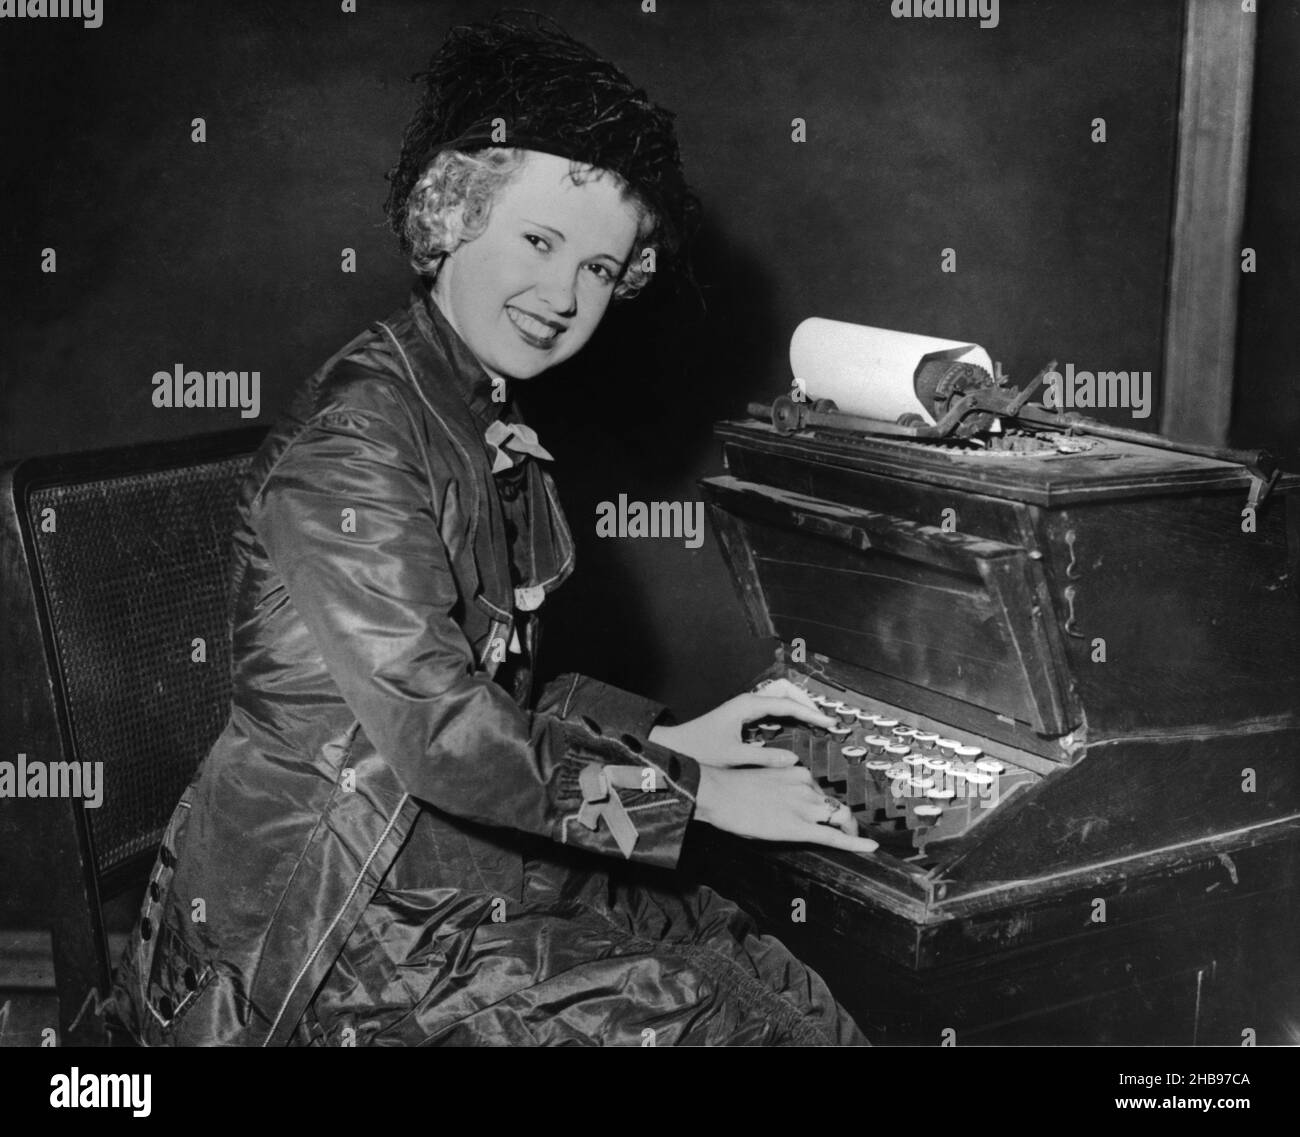 https://c8.alamy.com/comp/2HB97CA/miss-eileen-donehue-depicts-one-of-the-worlds-1st-typists-with-one-of-the-first-typewriters-at-60th-anniversary-of-the-typewriter-event-ny-circa-1933-2HB97CA.jpg